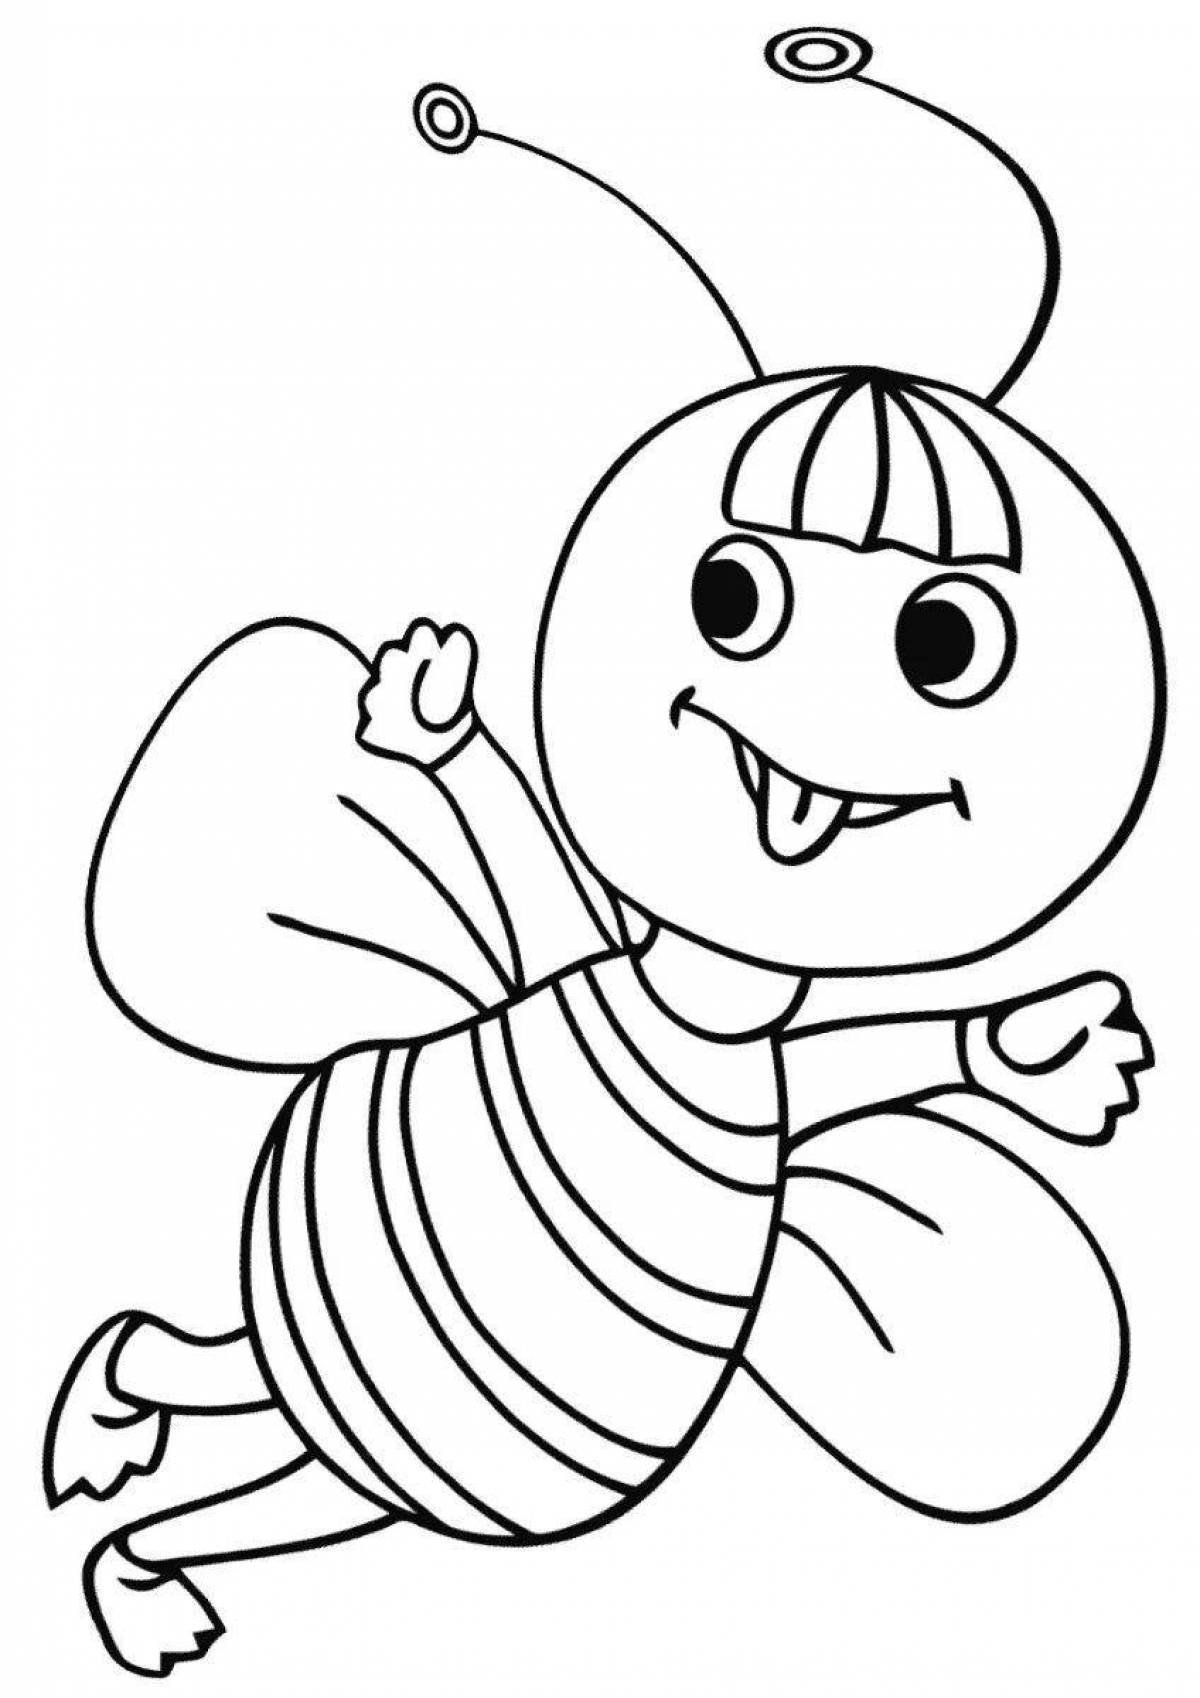 Colorful Shemale Coloring Page for Kids